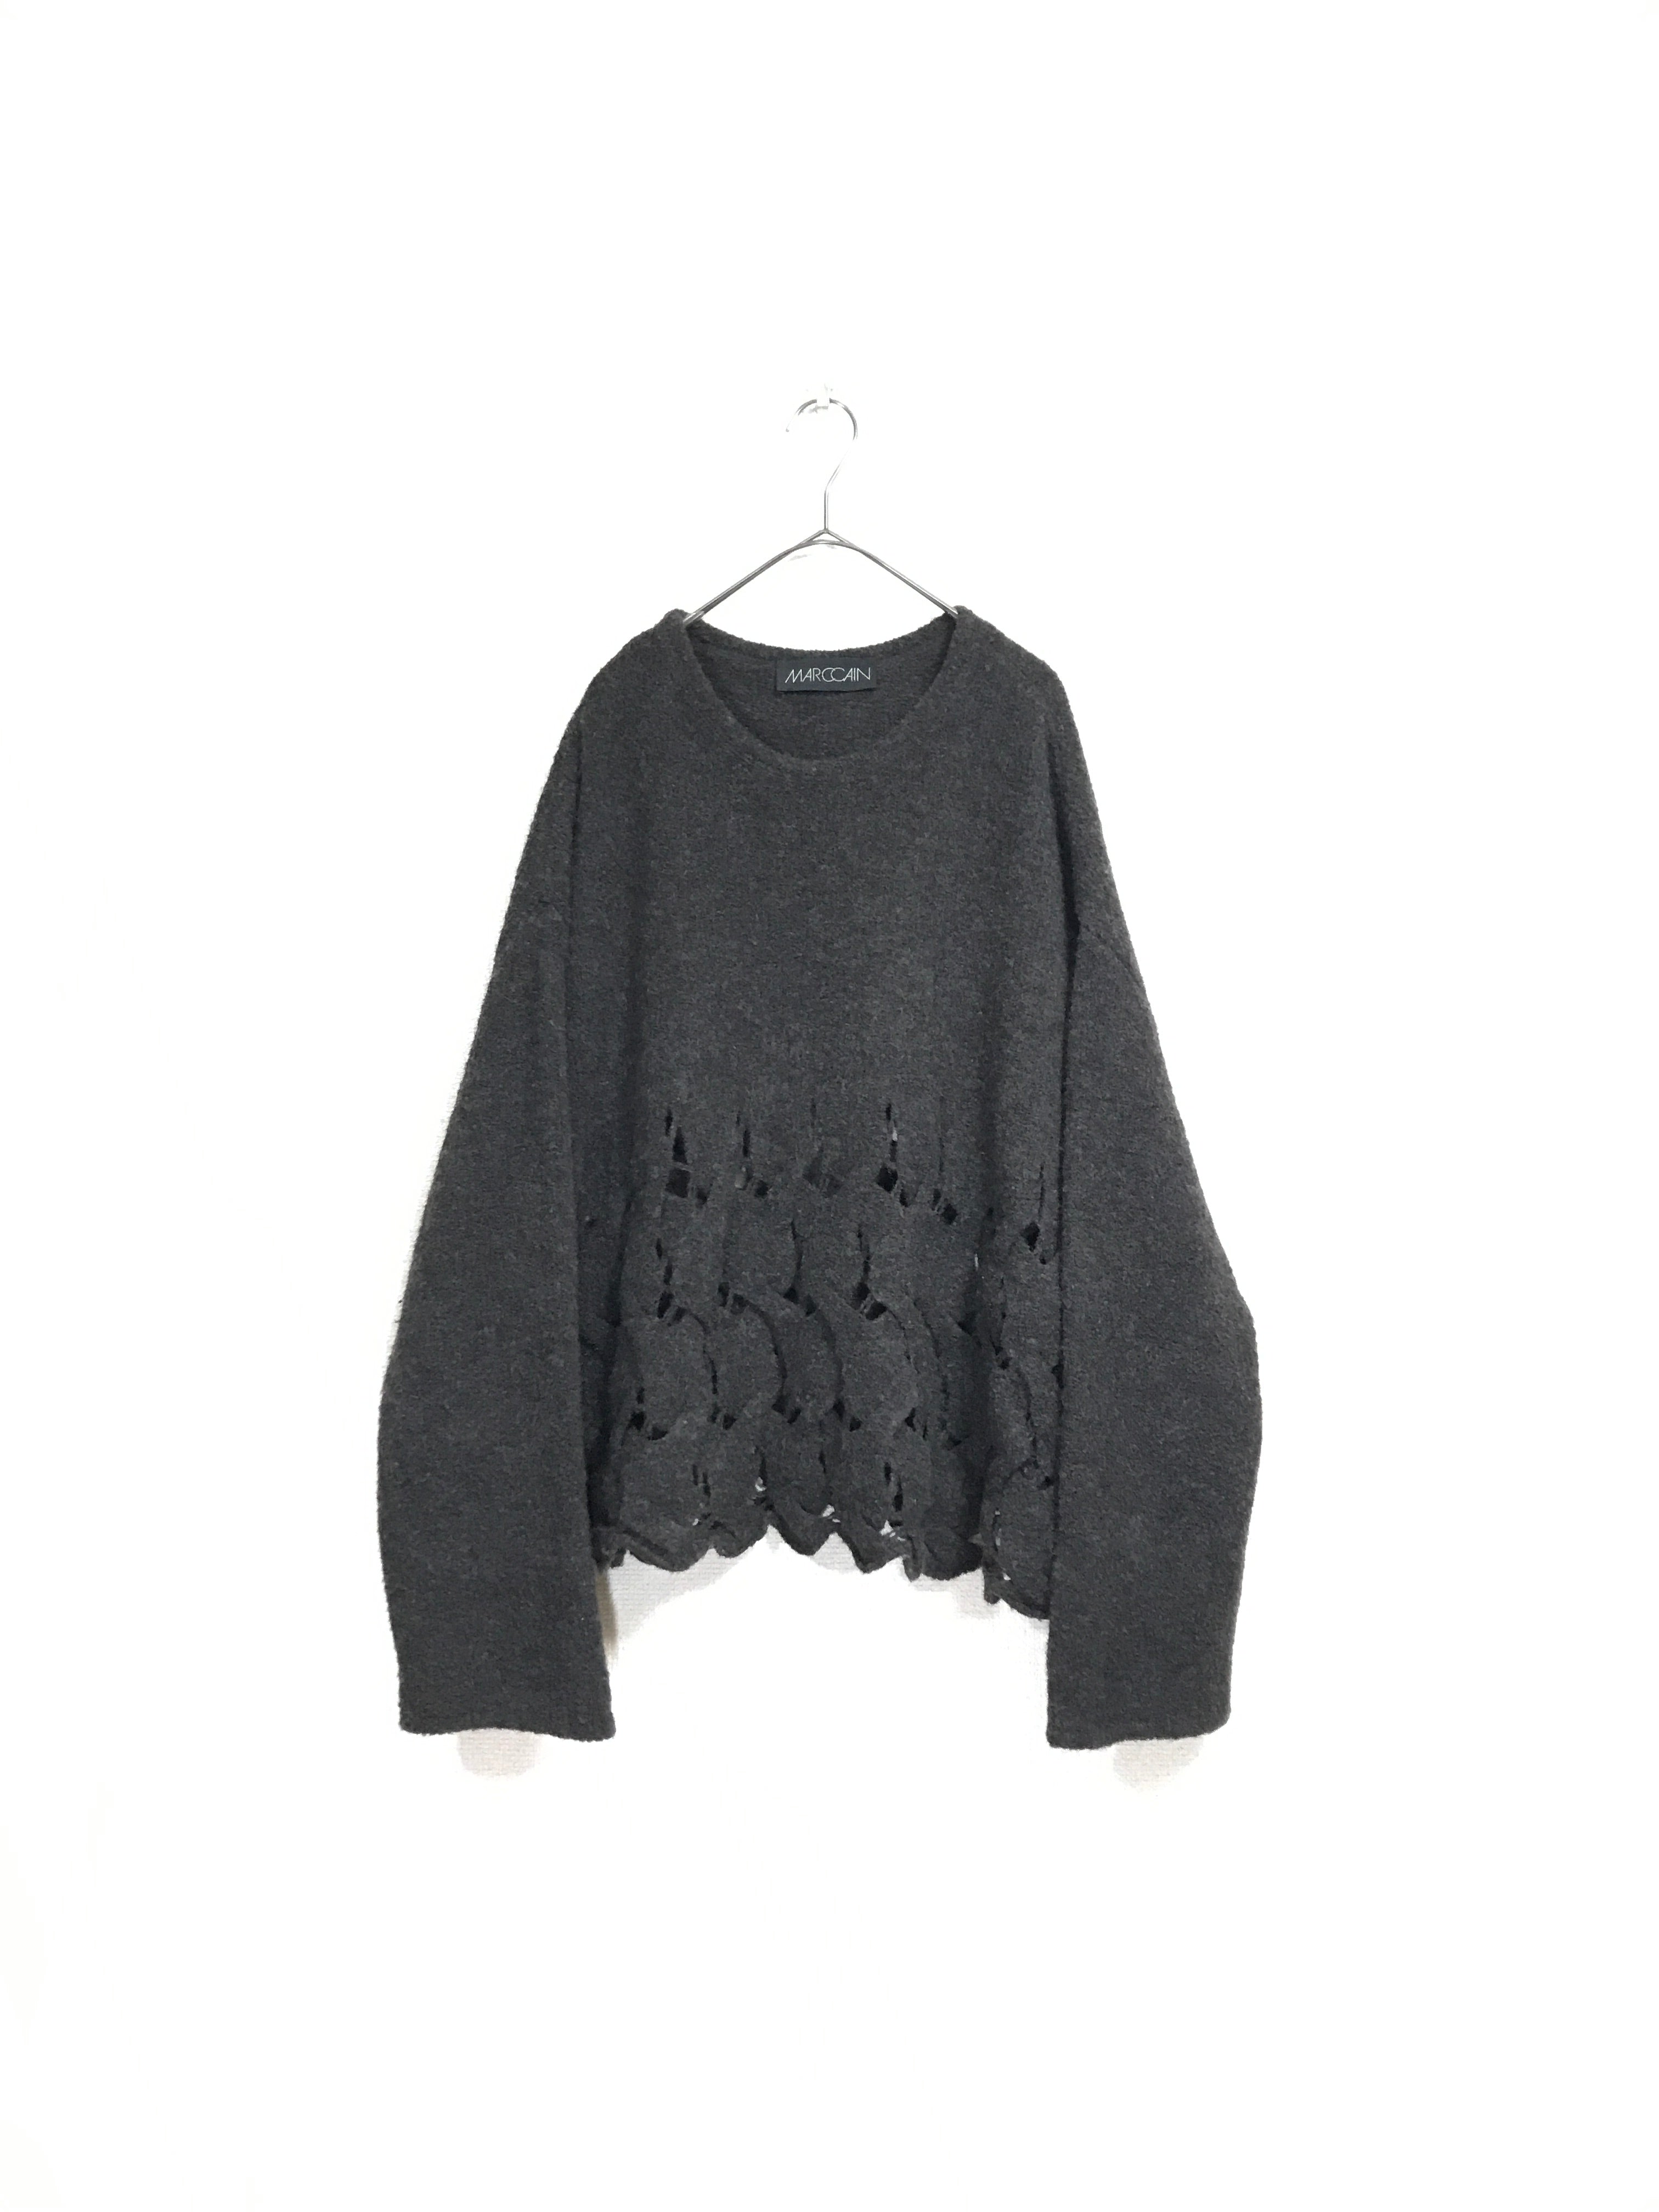 "MARC CAIN" wool knit sweater with punching decoration